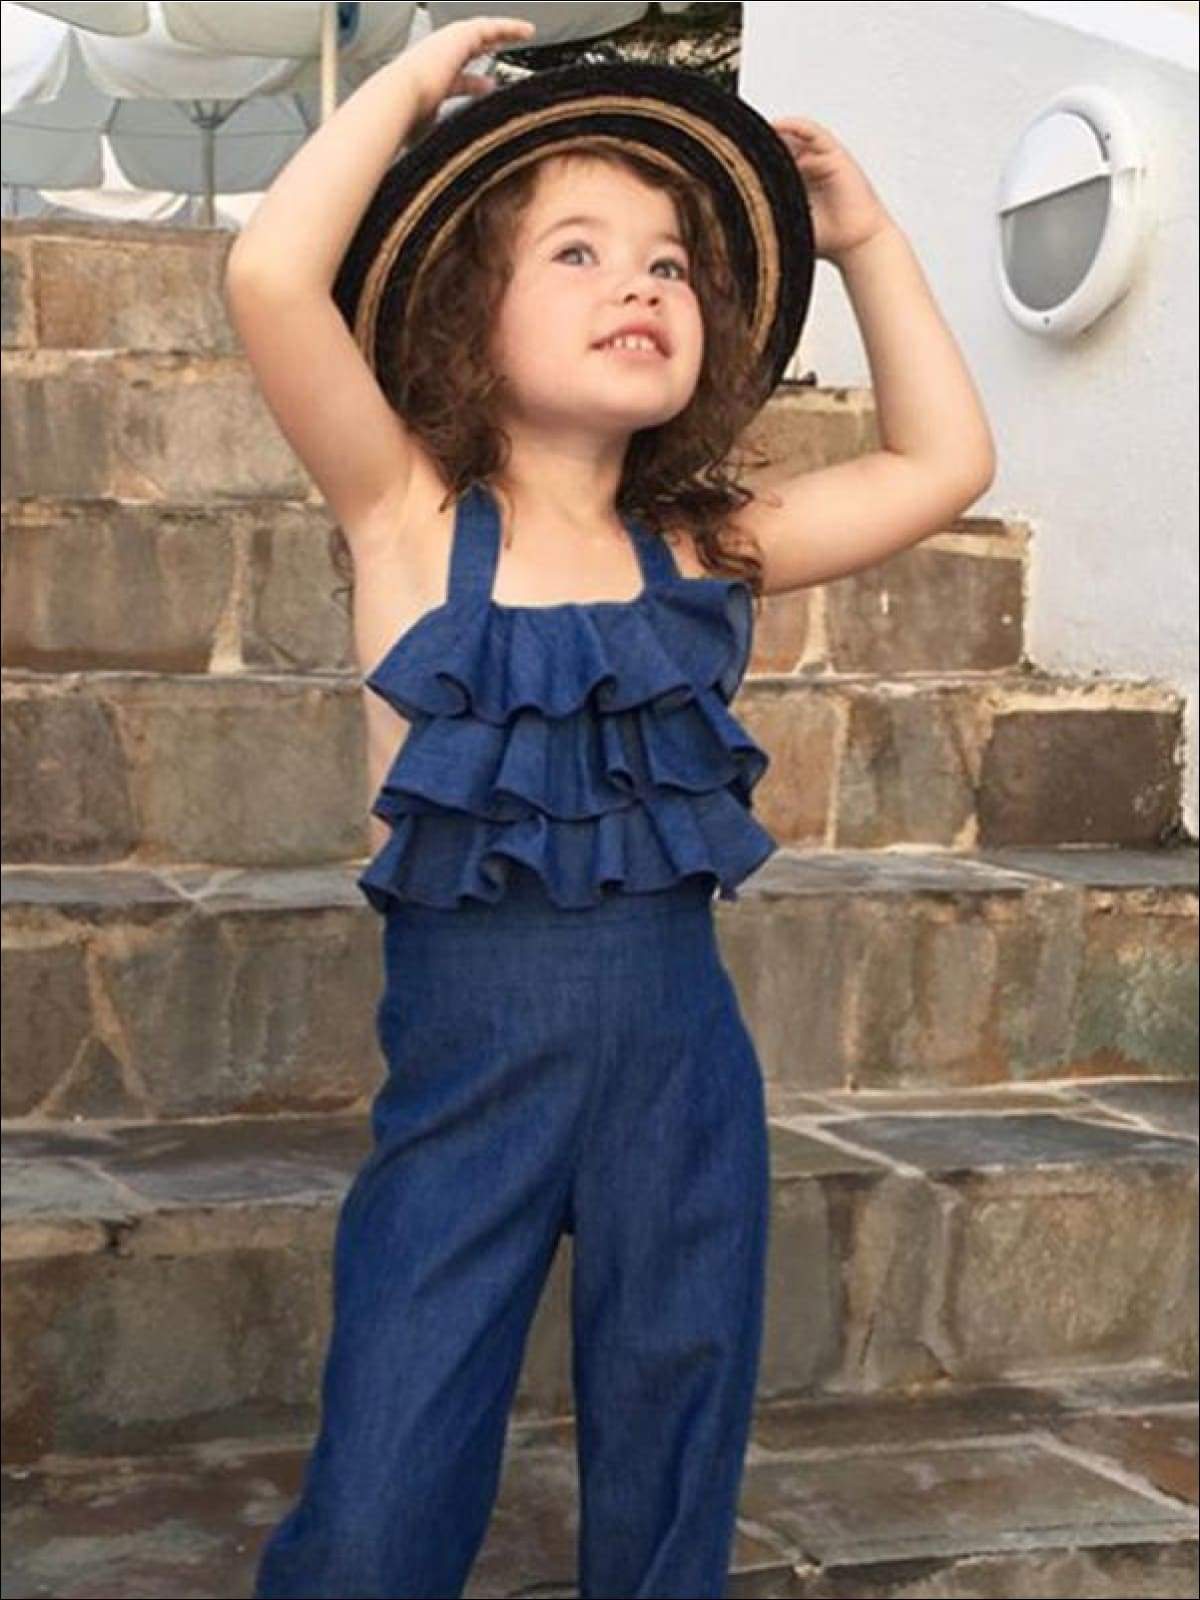 Toddler Spring Outfits | Girls Halter Ruffle Bodice Chambray Jumpsuit